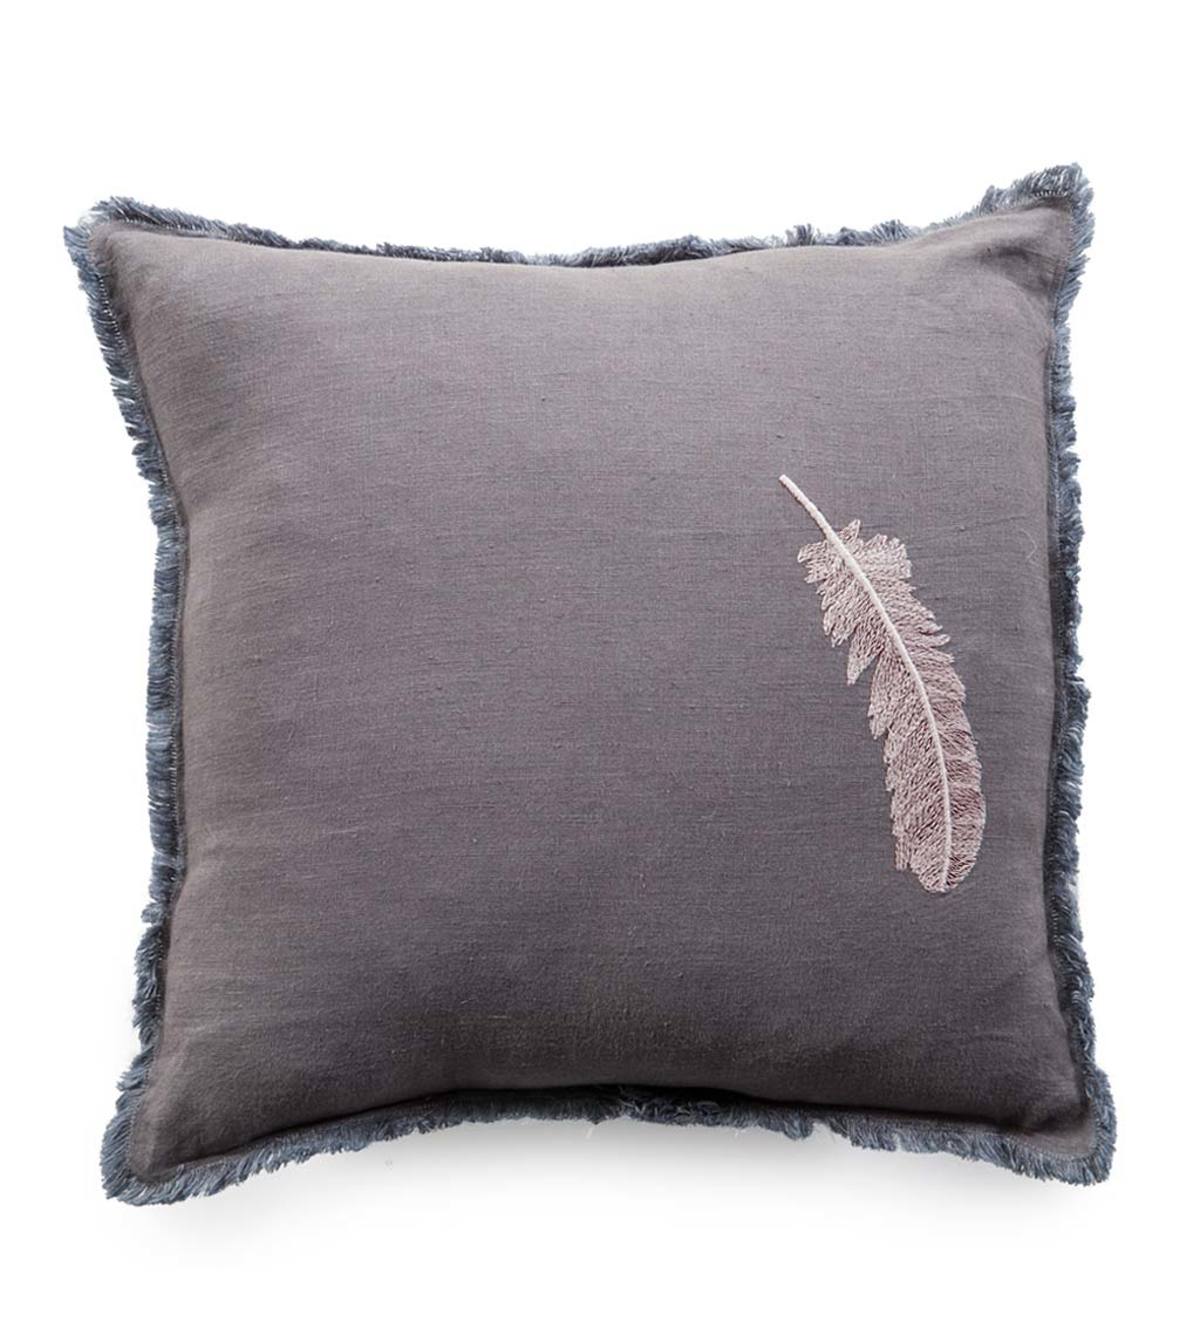 Natural Linen Embroidered Feather Pillow Cover, 14" sq. - Charcoal